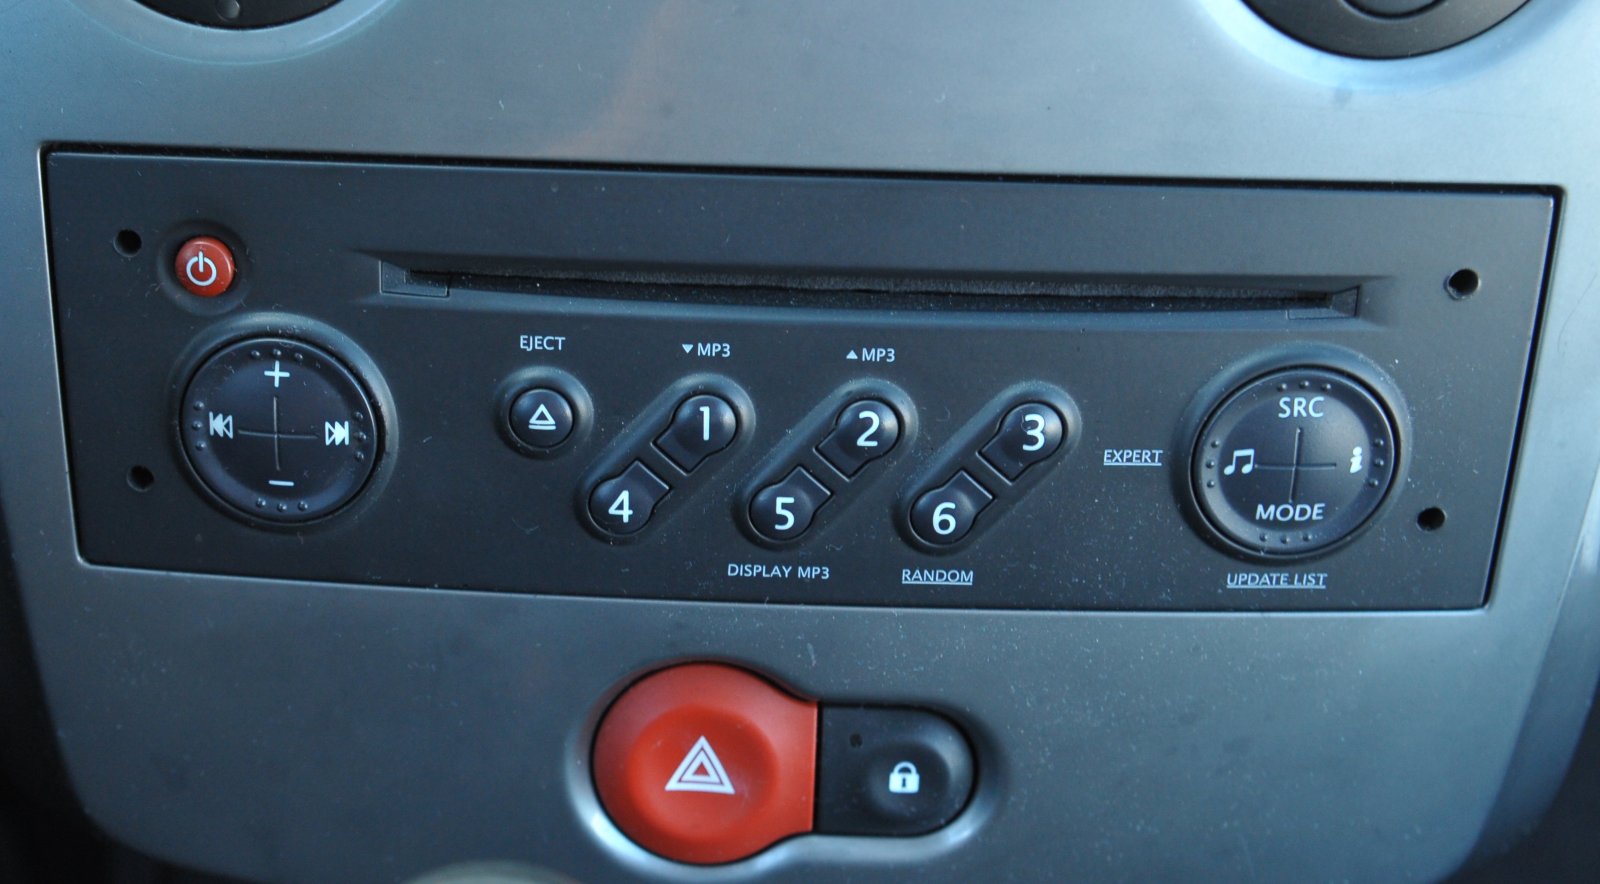 SRC Button on Car Radio: What is It for, How and When to Use It?